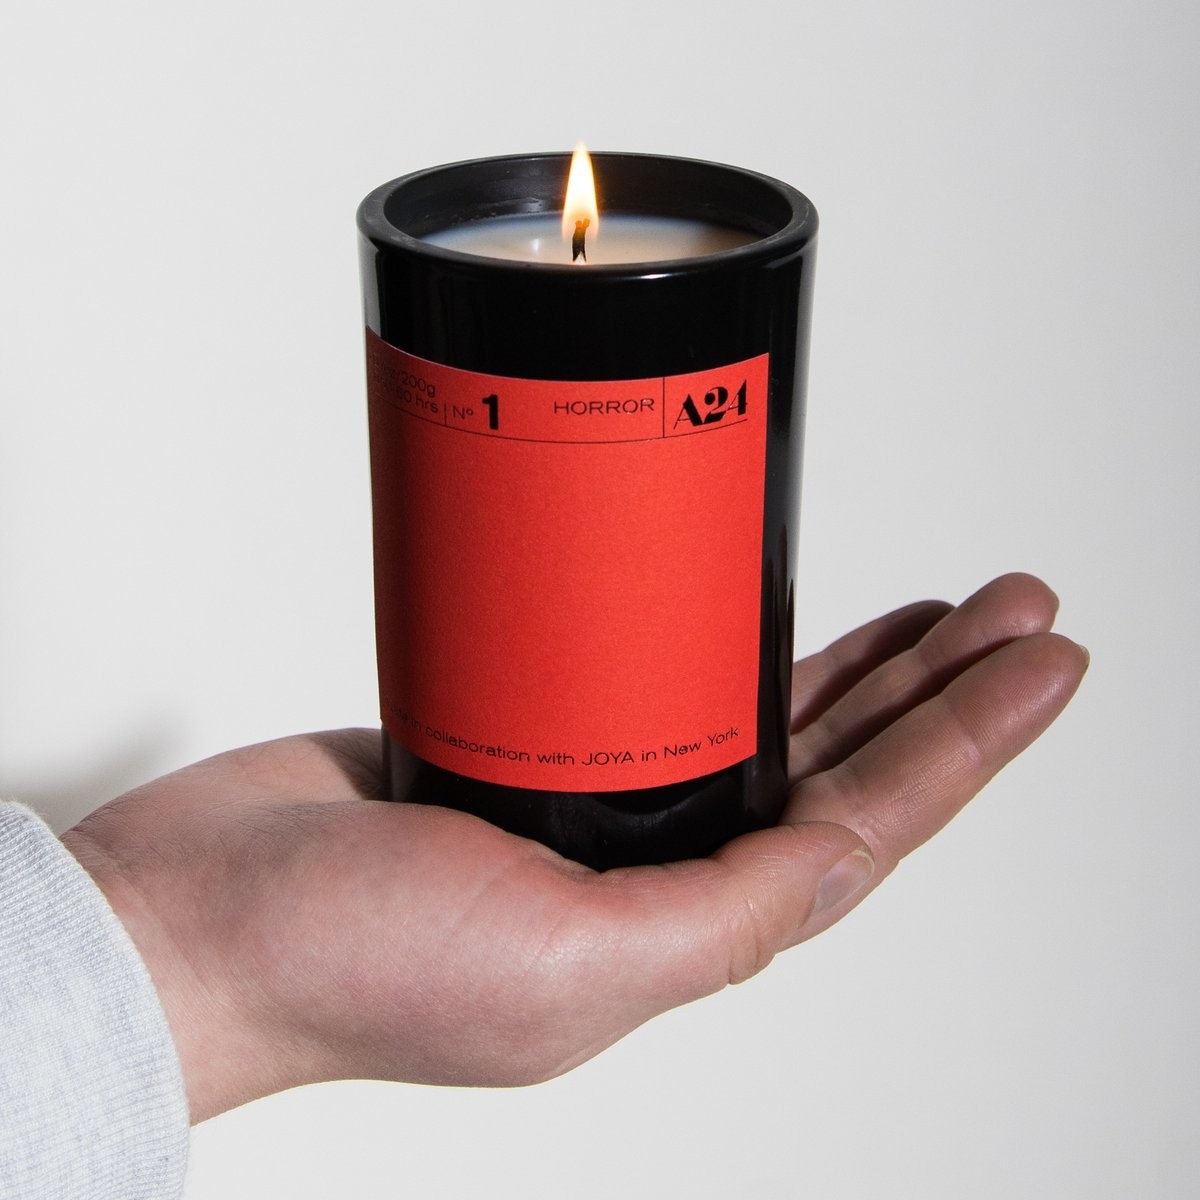 A hand holding the thriller candle